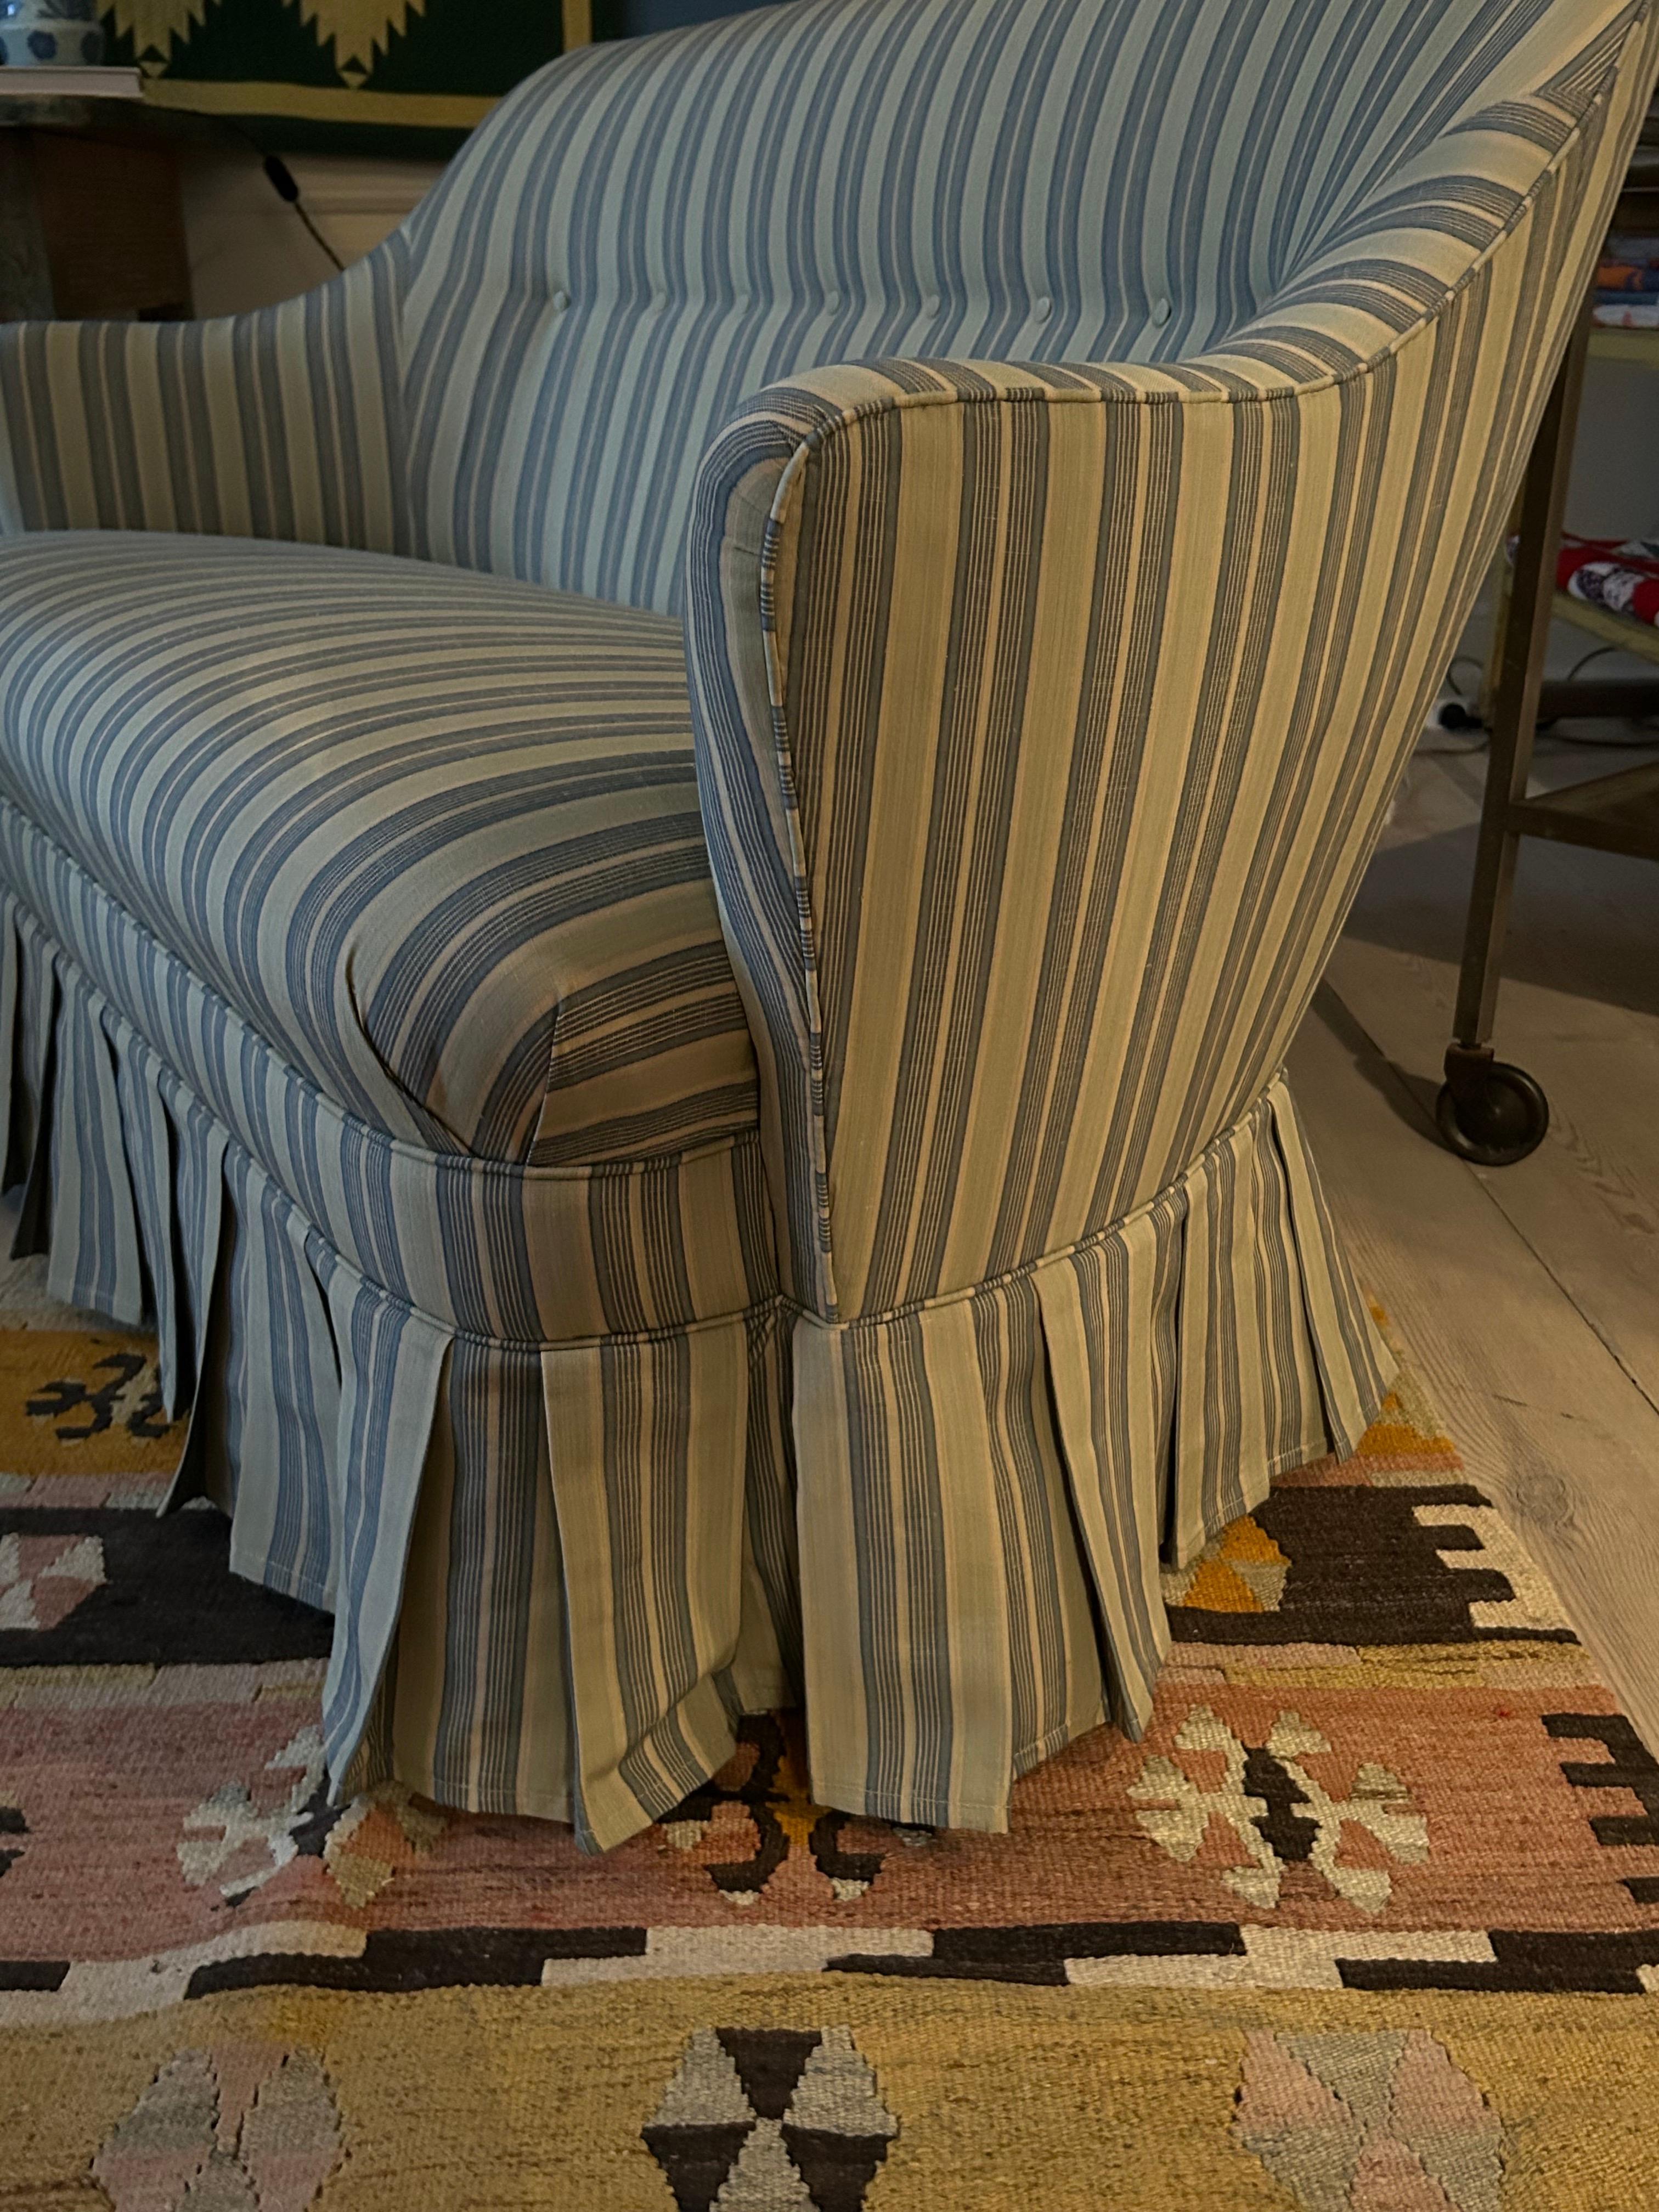 Mid-20th Century Vintage Sofa in Customized Striped Upholstery by the Apartment, Sweden, 1950 For Sale